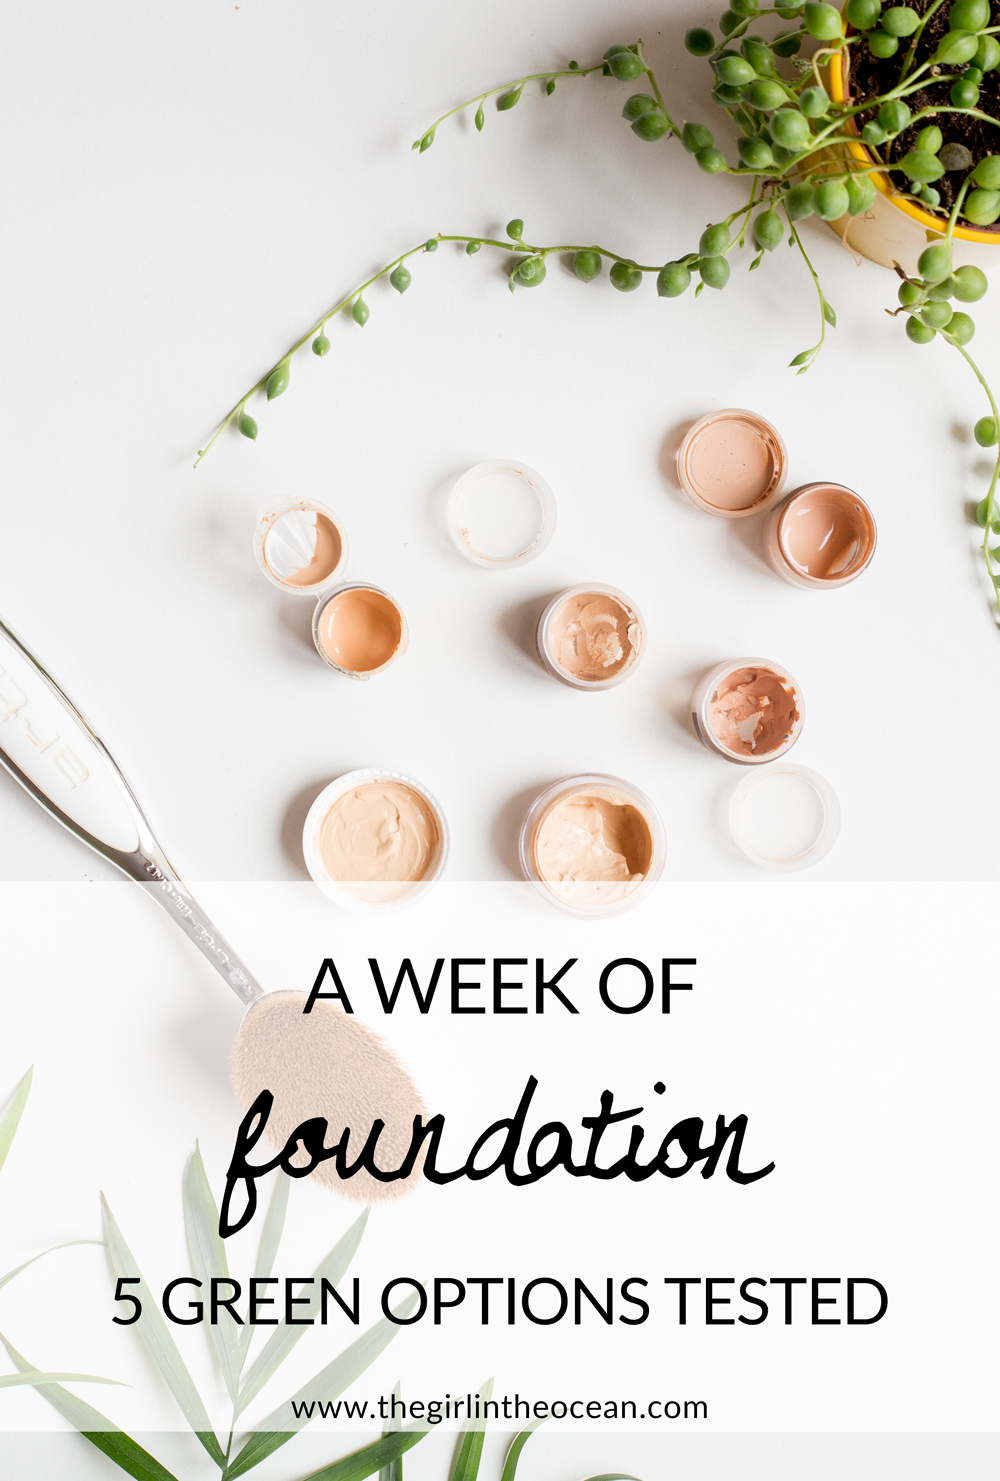 A Week of Foundation - 5 Green Options Tested